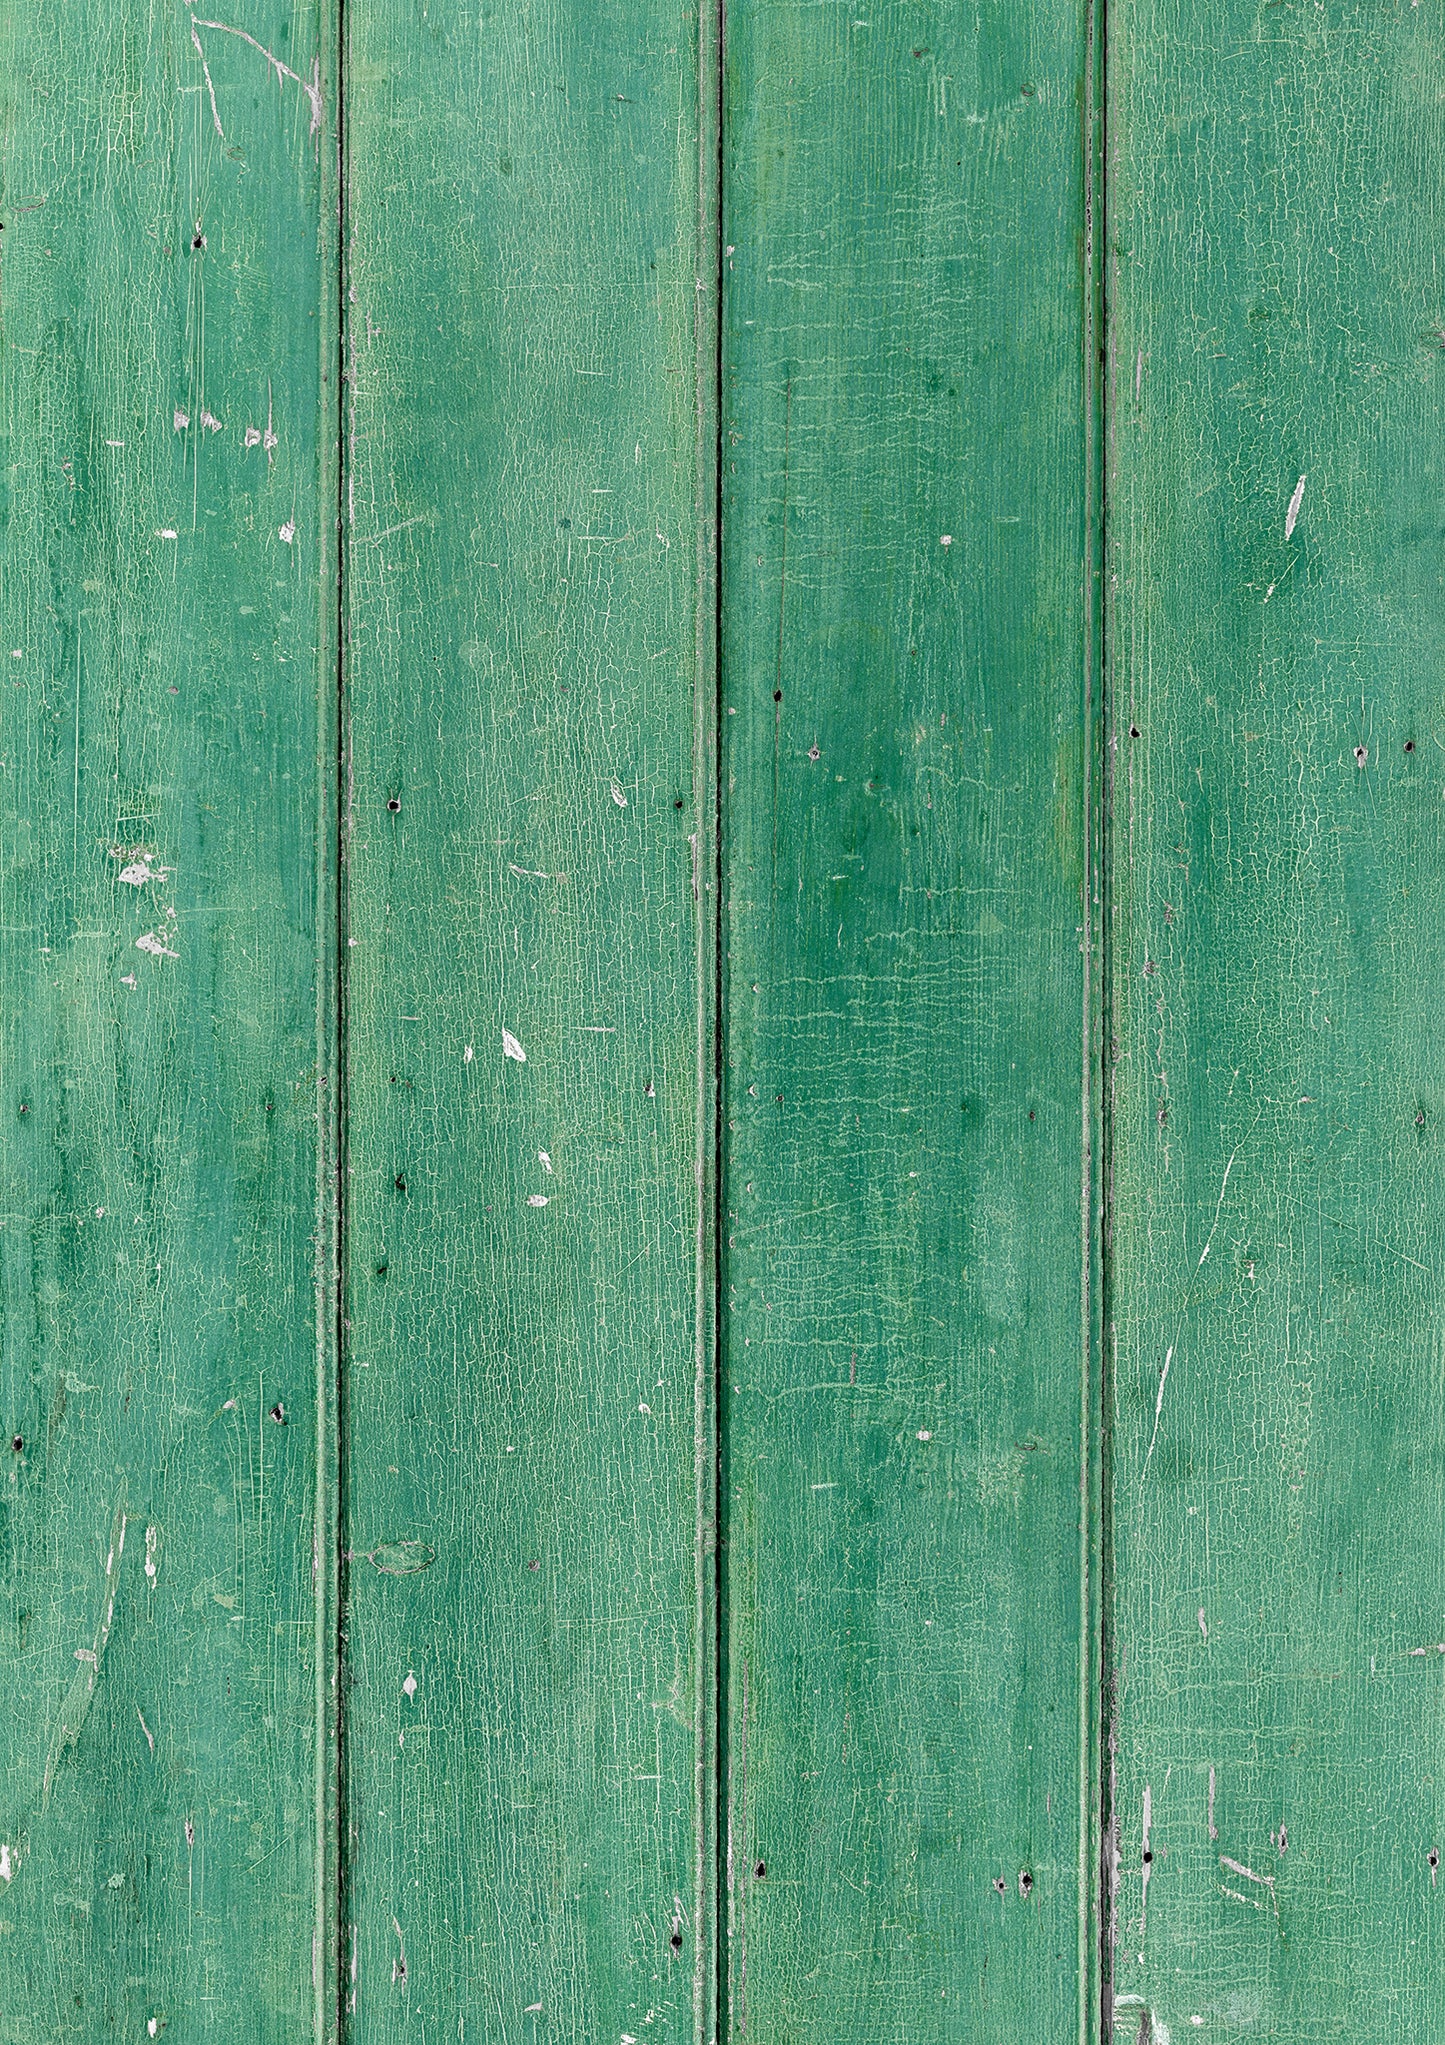 Green A1 Photography Backdrop - Rustic Timber